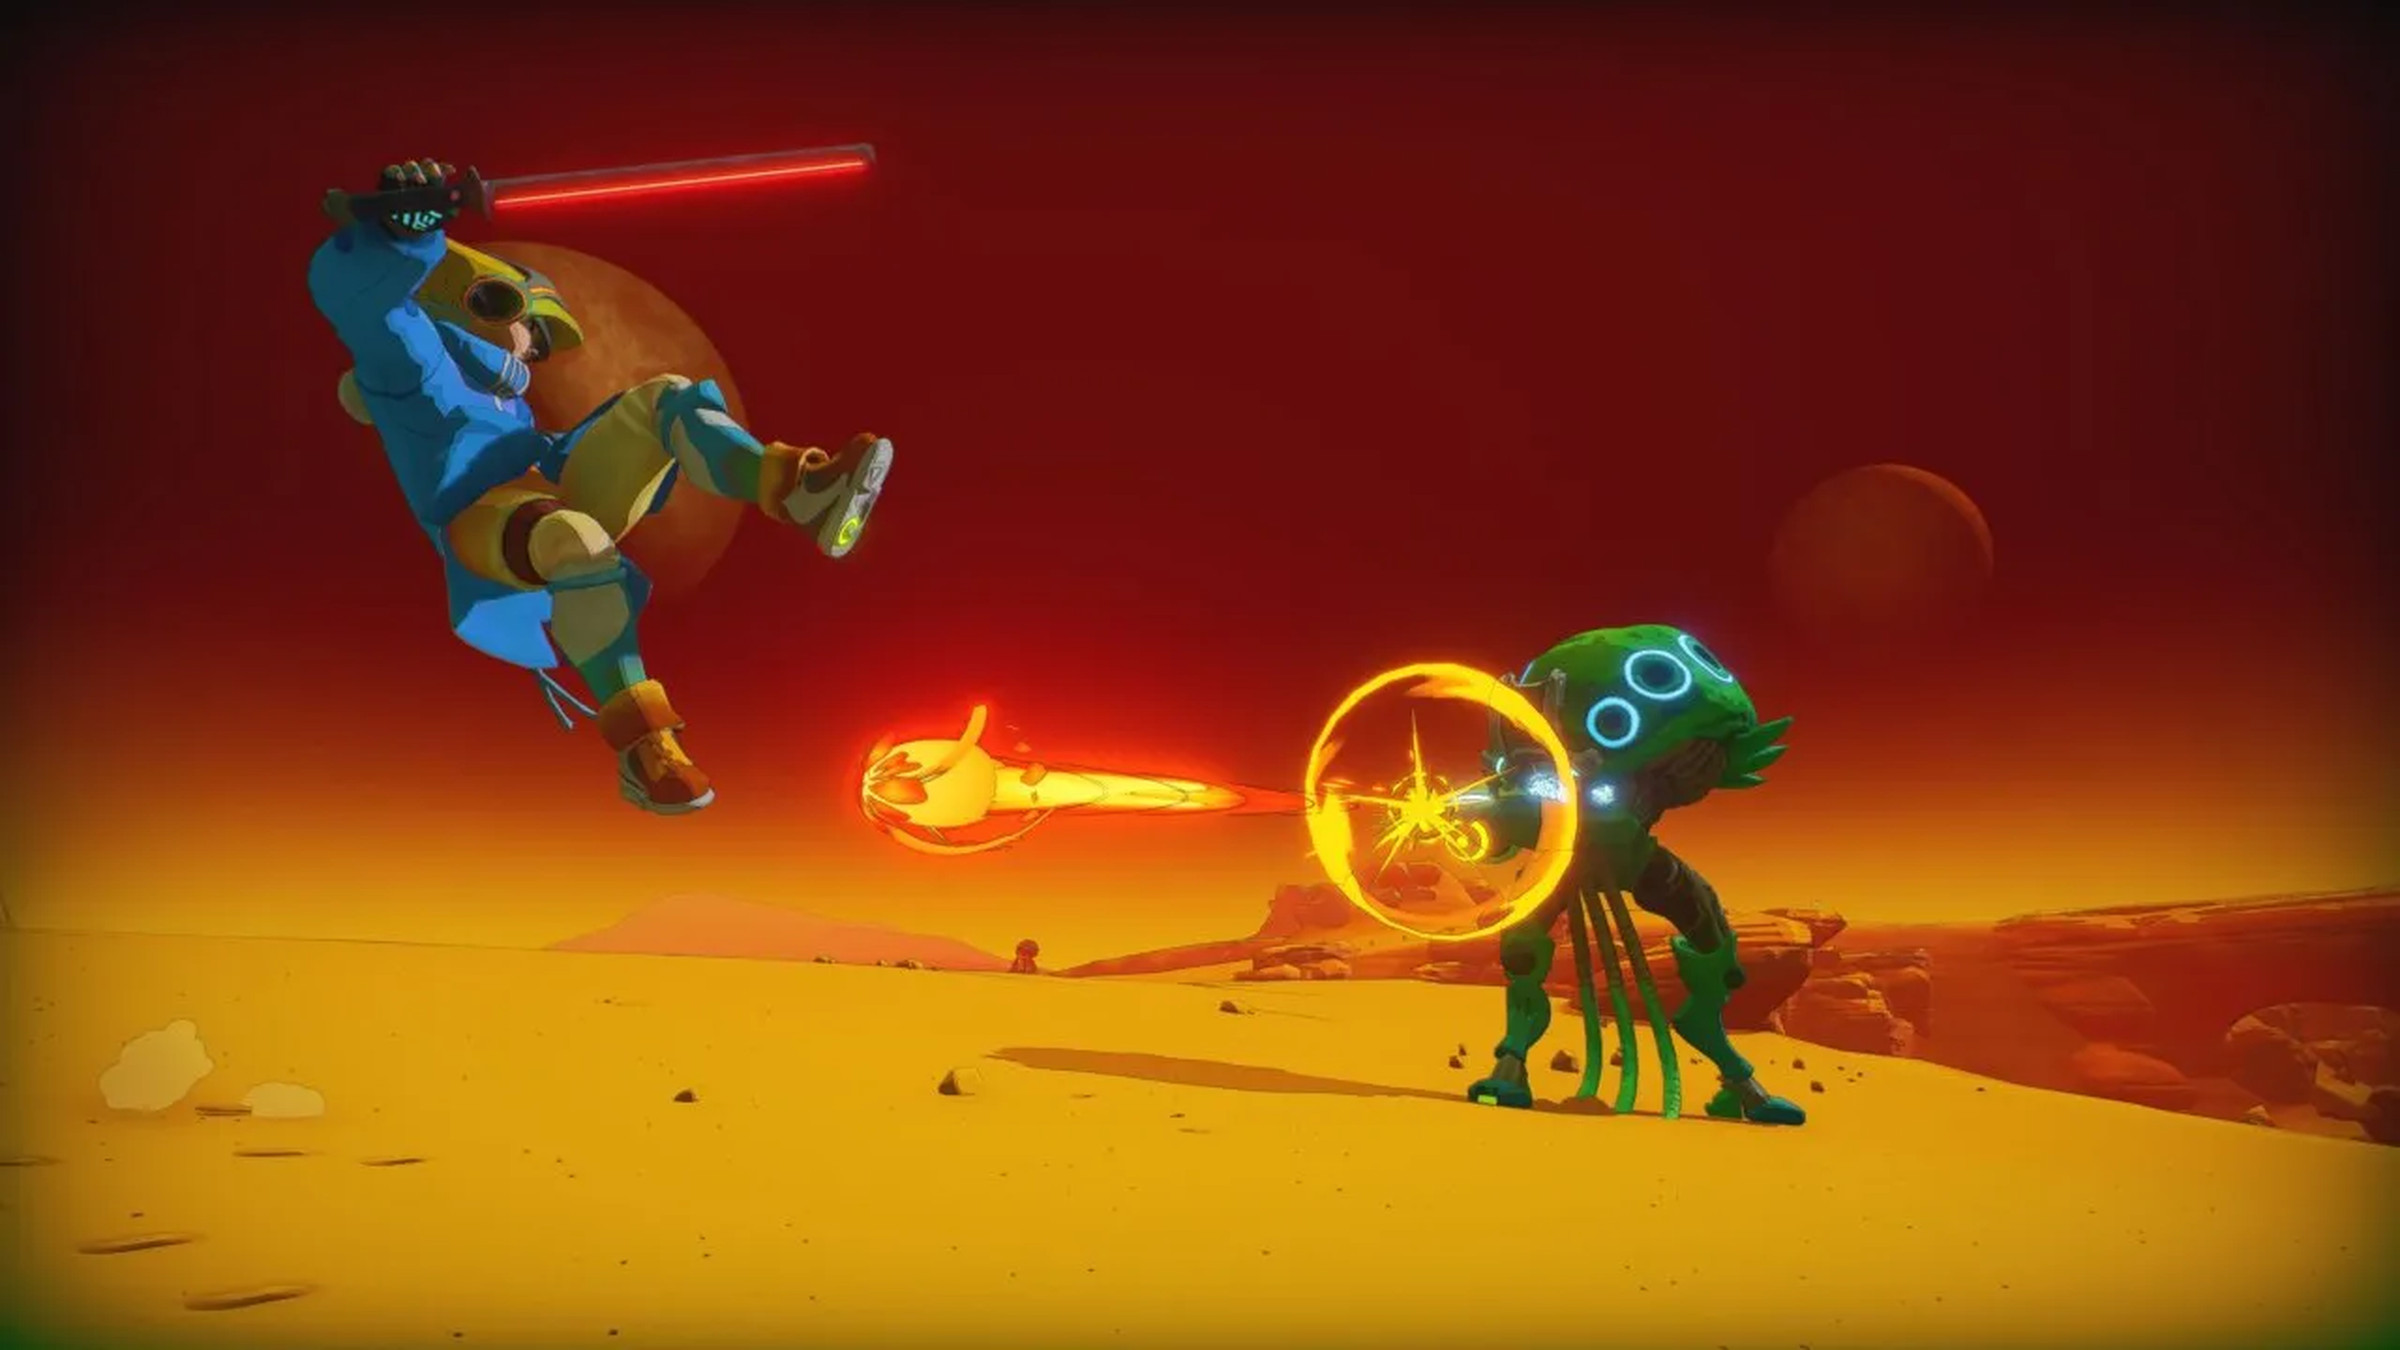 Screenshot from PixelJunk Raiders where a human player dodges a laser bolt fired from a jellyfish-like creature on a sandy ground